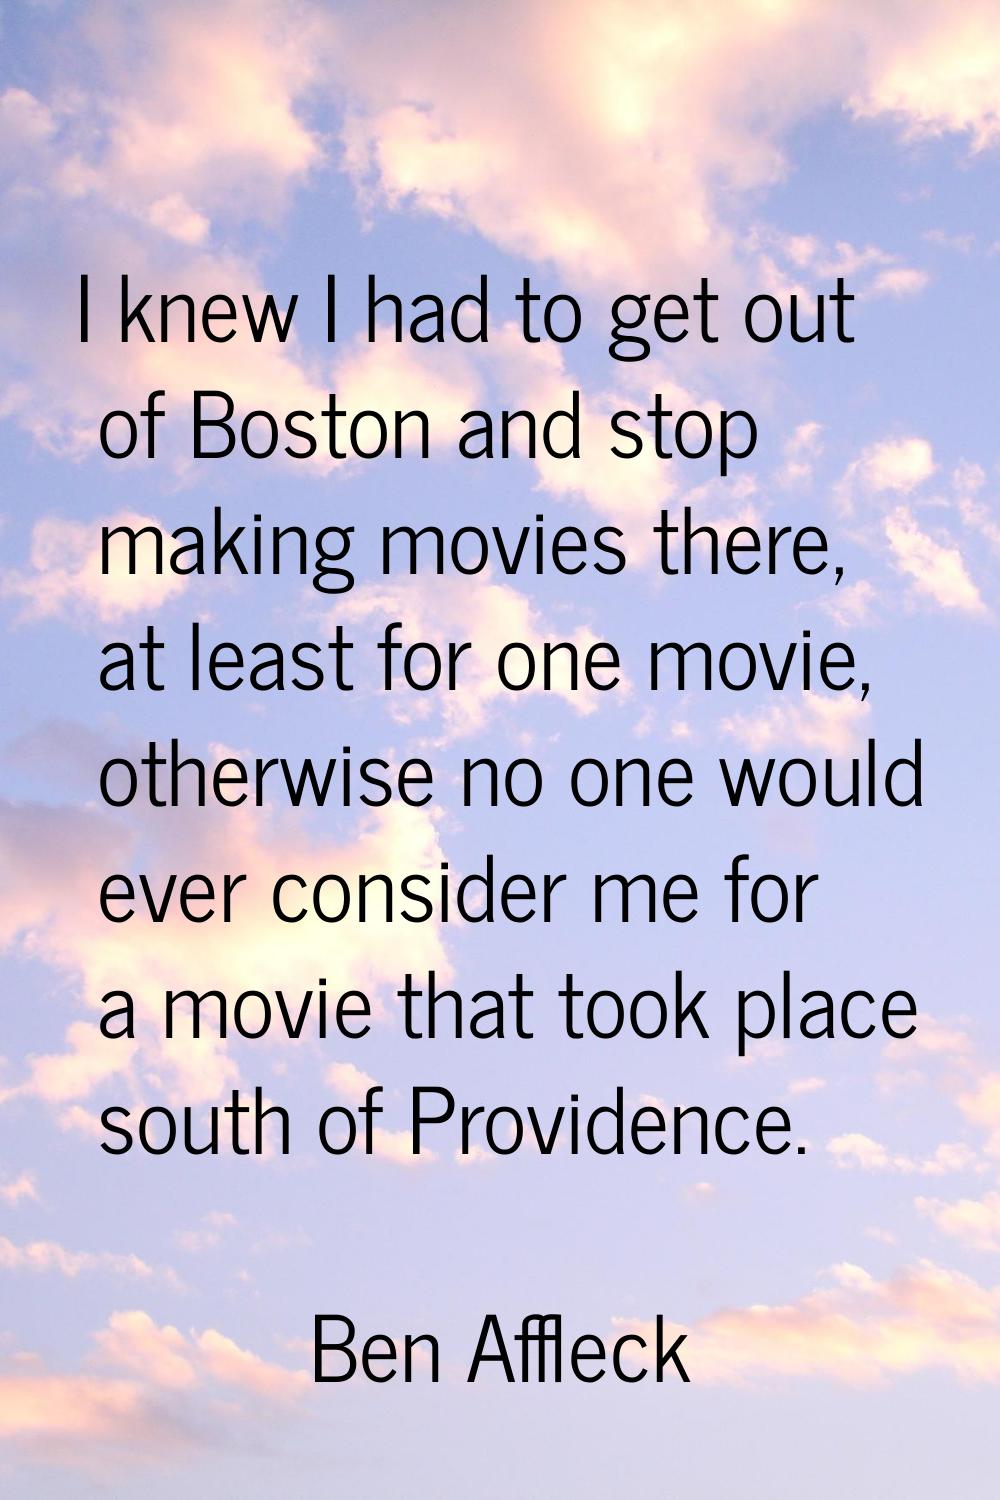 I knew I had to get out of Boston and stop making movies there, at least for one movie, otherwise n